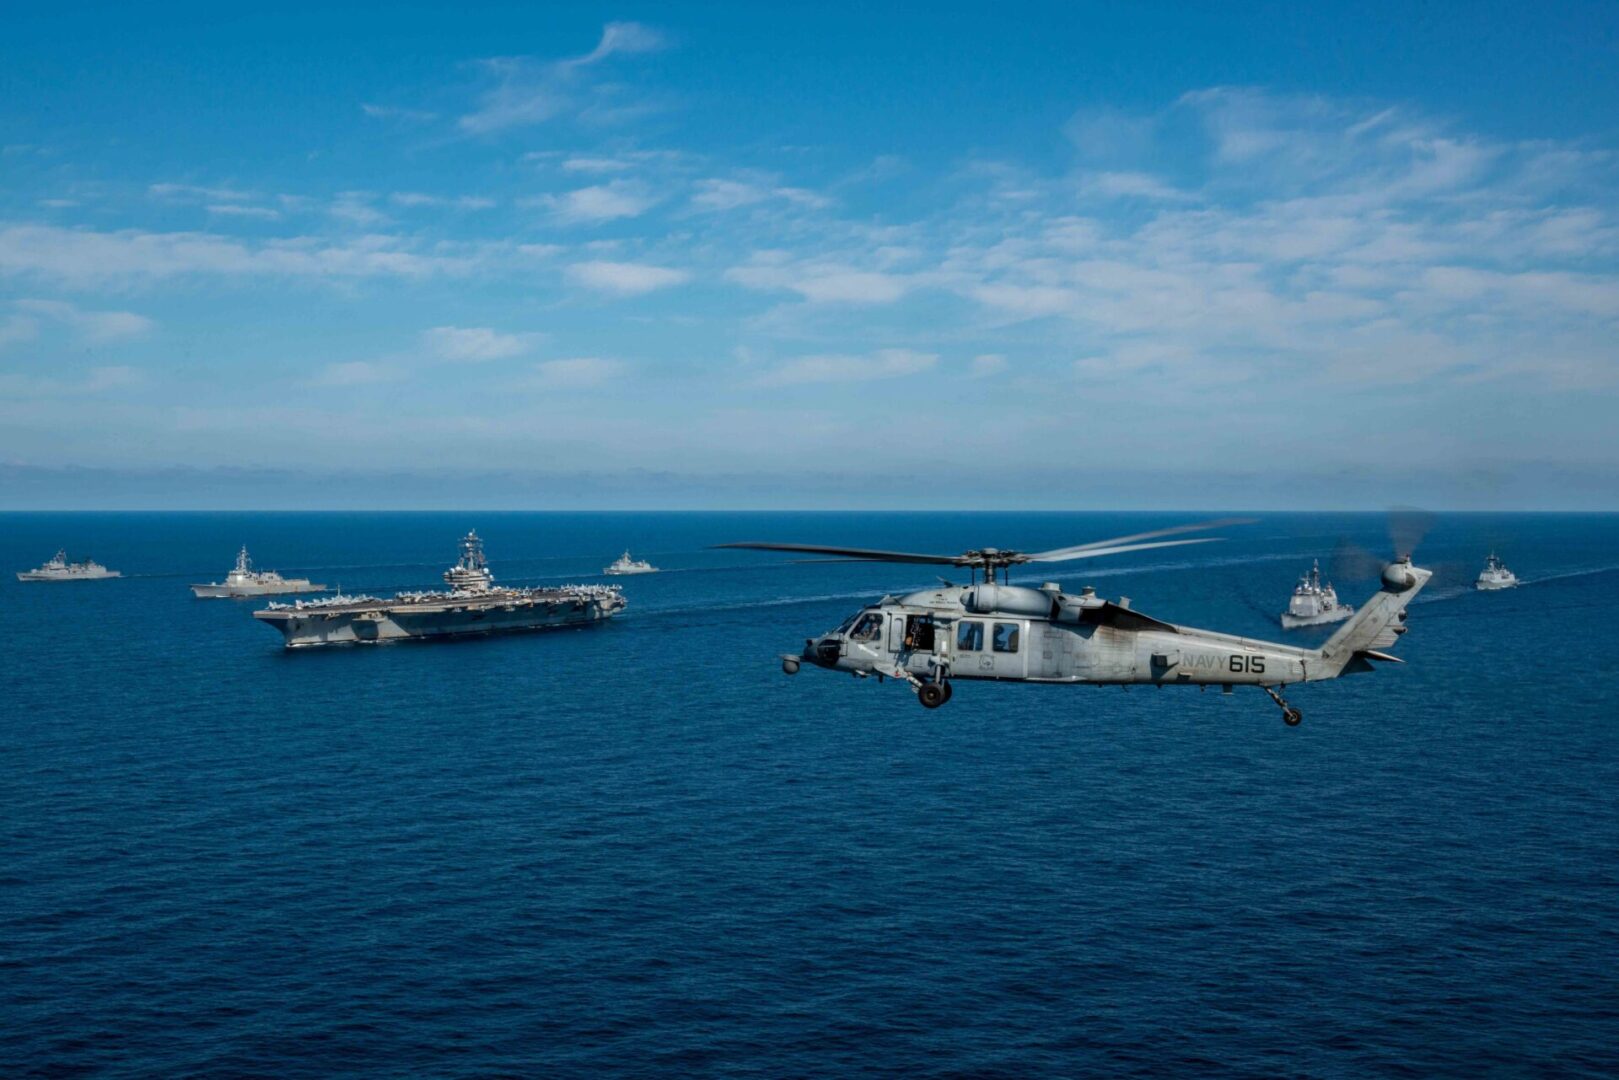 WATERS EAST OF THE KOREAN PENINSULA (Sept. 29, 2022) An MH-60S Sea Hawk helicopter attached to the Golden Falcons of Helicopter Sea Combat Squadron (HSC) 12, flies by the U.S. NavyÕs only forward-deployed aircraft carrier, USS Ronald Reagan (CVN 76), the guided0missile destroyer USS Chancellorsville (CG 62), the guided-missile destroyer USS Benfold (DDG 65) and the Republic of Korea (ROK) navy ships ROKS Gwanggaeto the Great (DDH 971), and ROKS Seoae Ryu Seong-ryong (DDG 993) steam in formation in waters east of the Korean Peninsula, Sept. 29, 2022. The Ronald Reagan Carrier Strike Group (CSG) is participating with the ROK Navy in Maritime Counter Special Operations Exercise (MCSOFEX) to strengthen interoperability and training. The U.S. routinely conducts CSG operations in the waters around the ROK to exercise maritime maneuvers, strengthen the U.S.-ROK alliance, and improve regional security. (U.S. Navy photo by Mass Communication Specialist 3rd Class Gray Gibson)